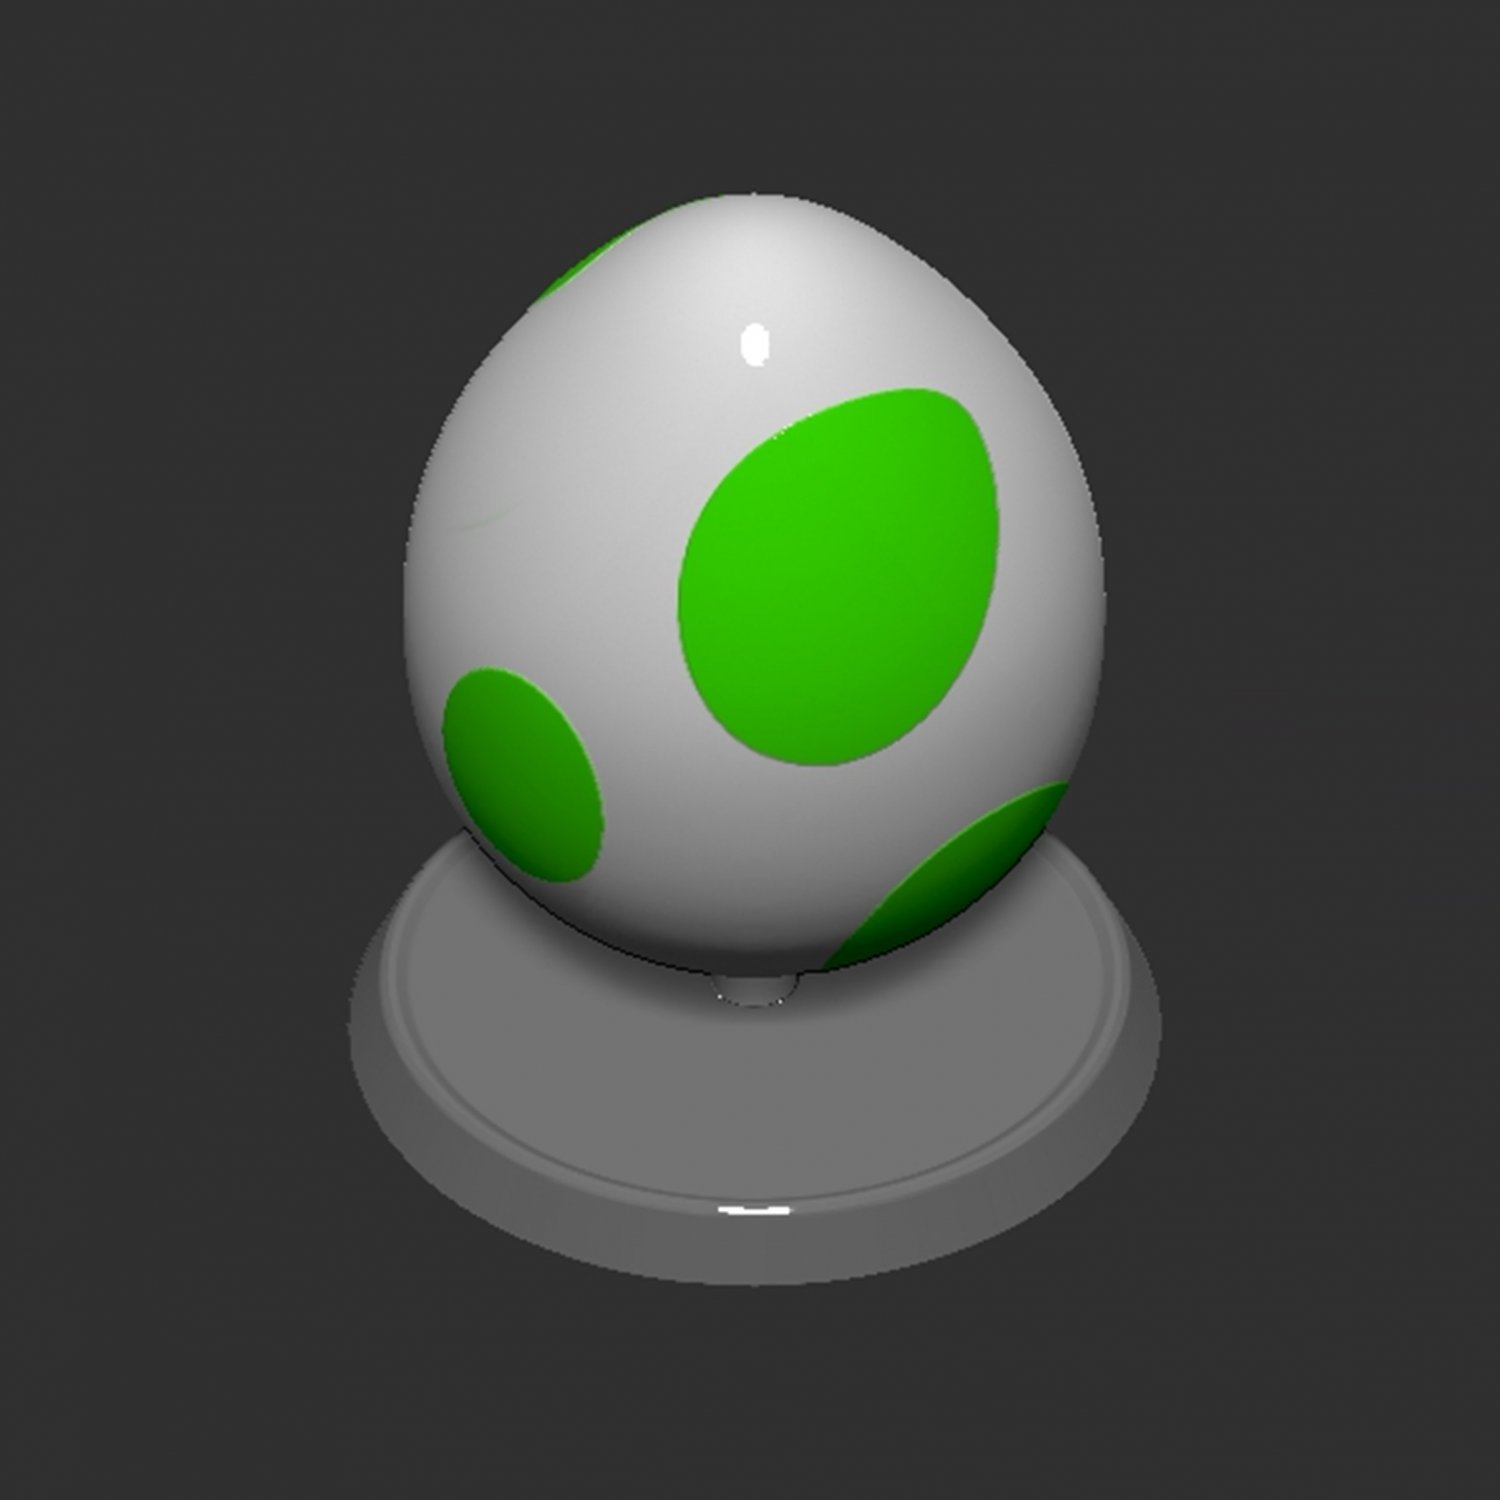 Yoshi Easter Egg - 3D model by Oddity3d on Thangs